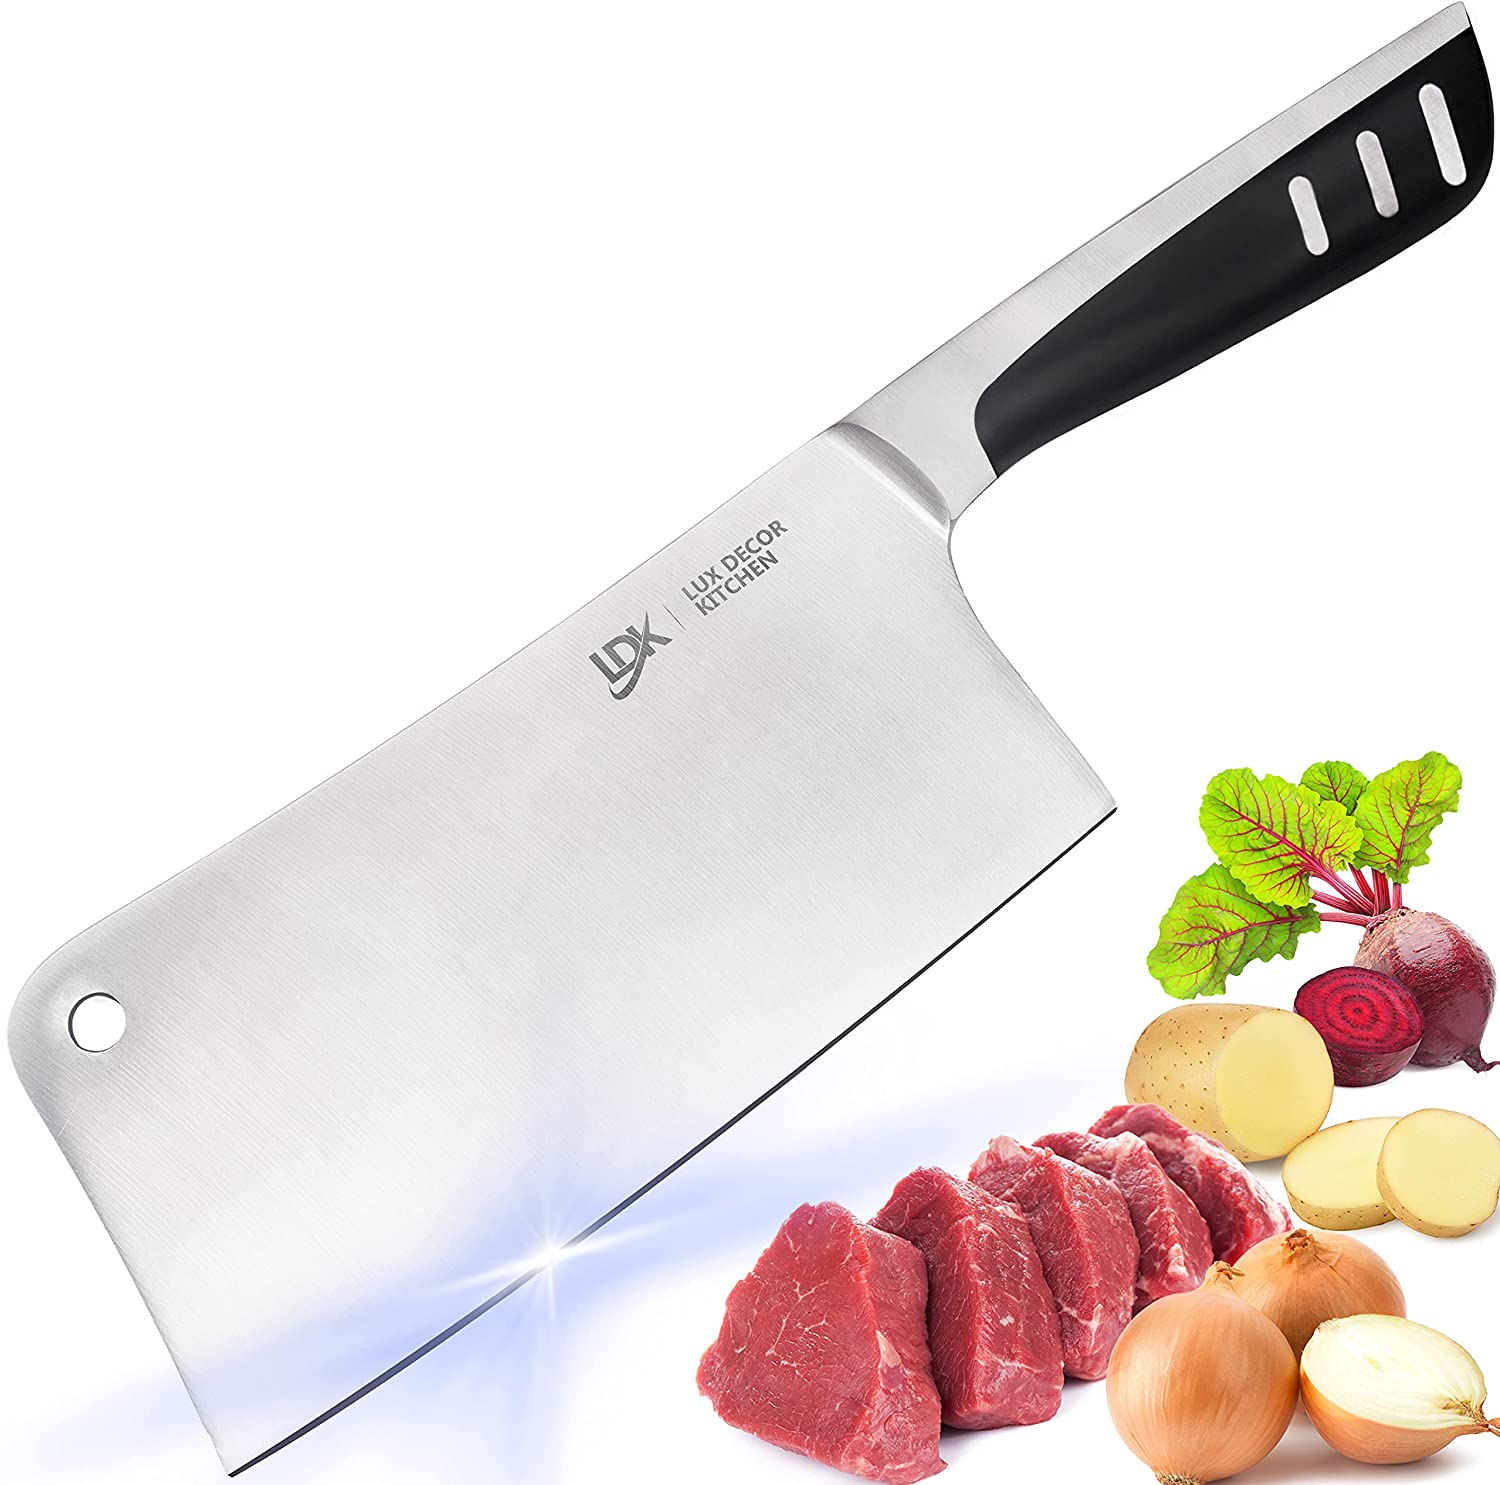 Best Meat Cleavers for butcher. Best Meat Cleavers for butcher.